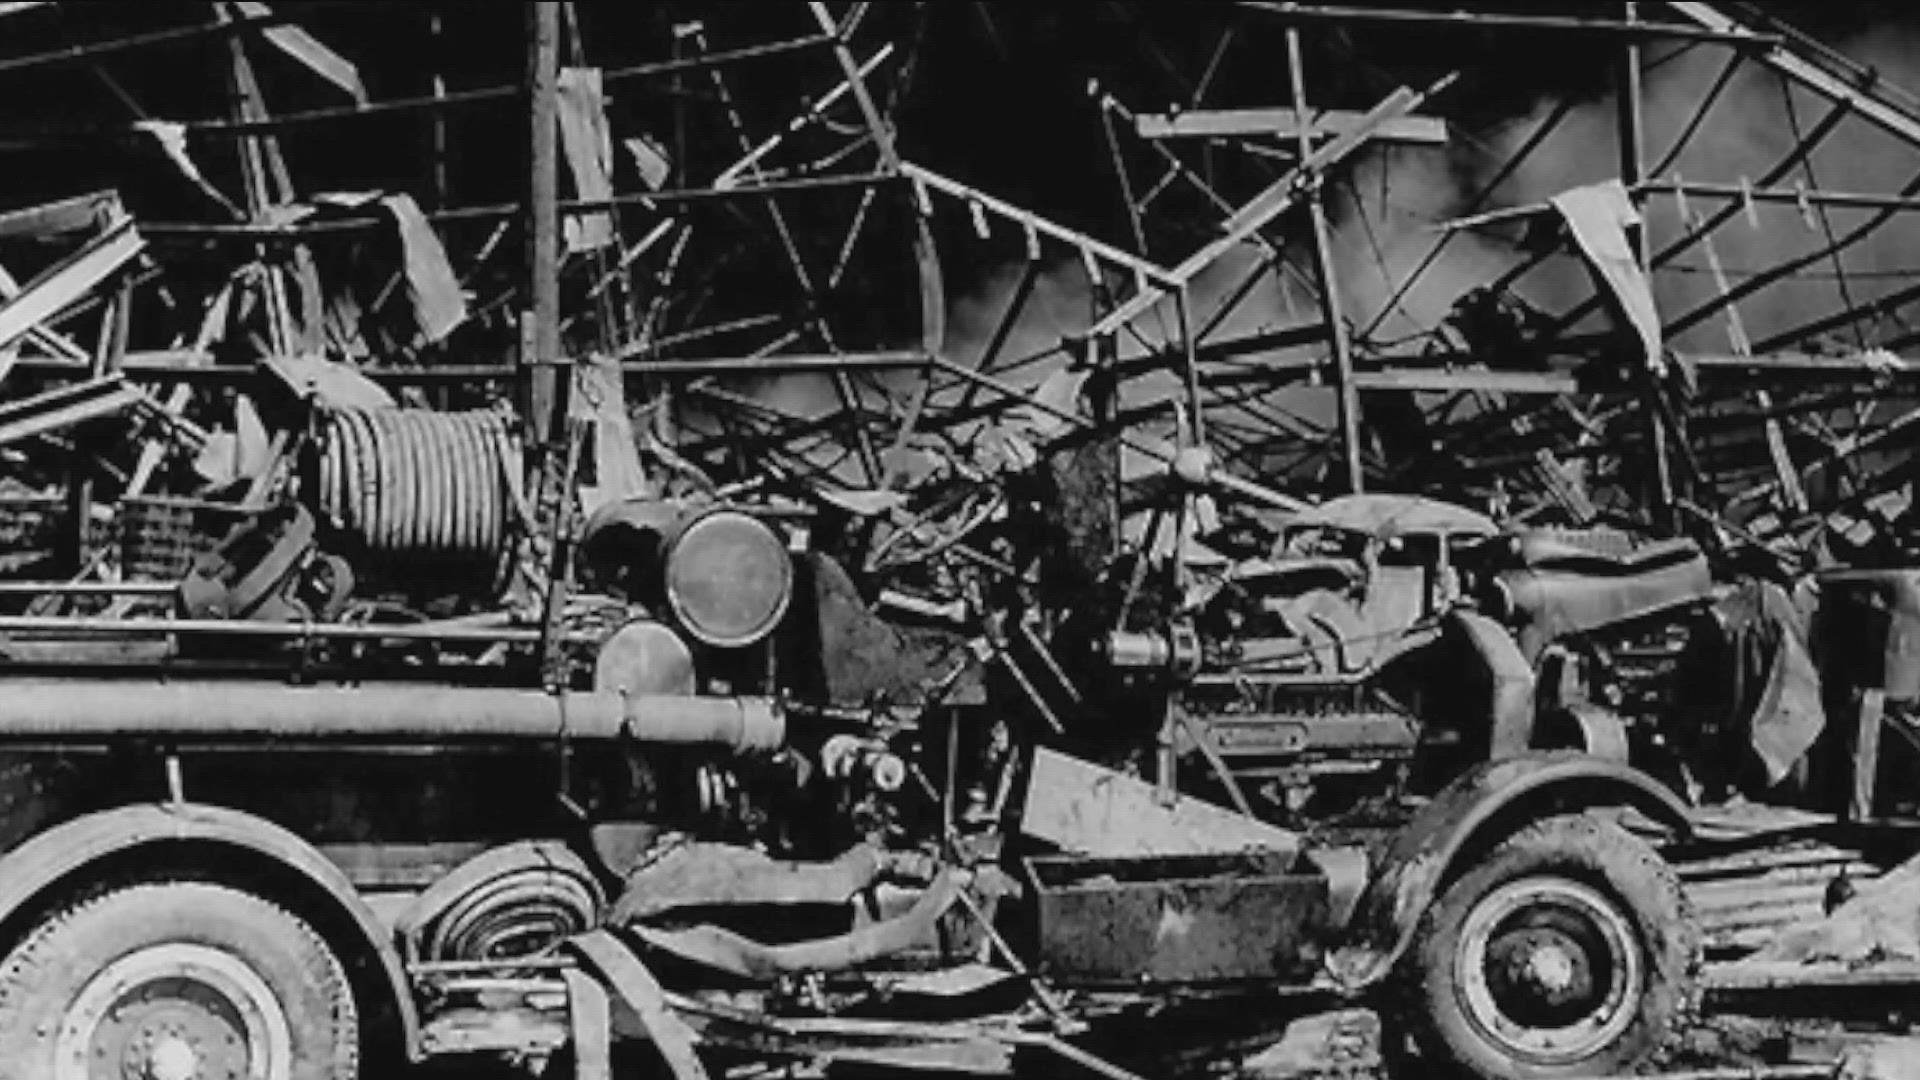 On April 16, 1947, the worst industrial disaster in American history happened about 200 miles from Austin. It's still remembered in Texas City as a day of tragedy.